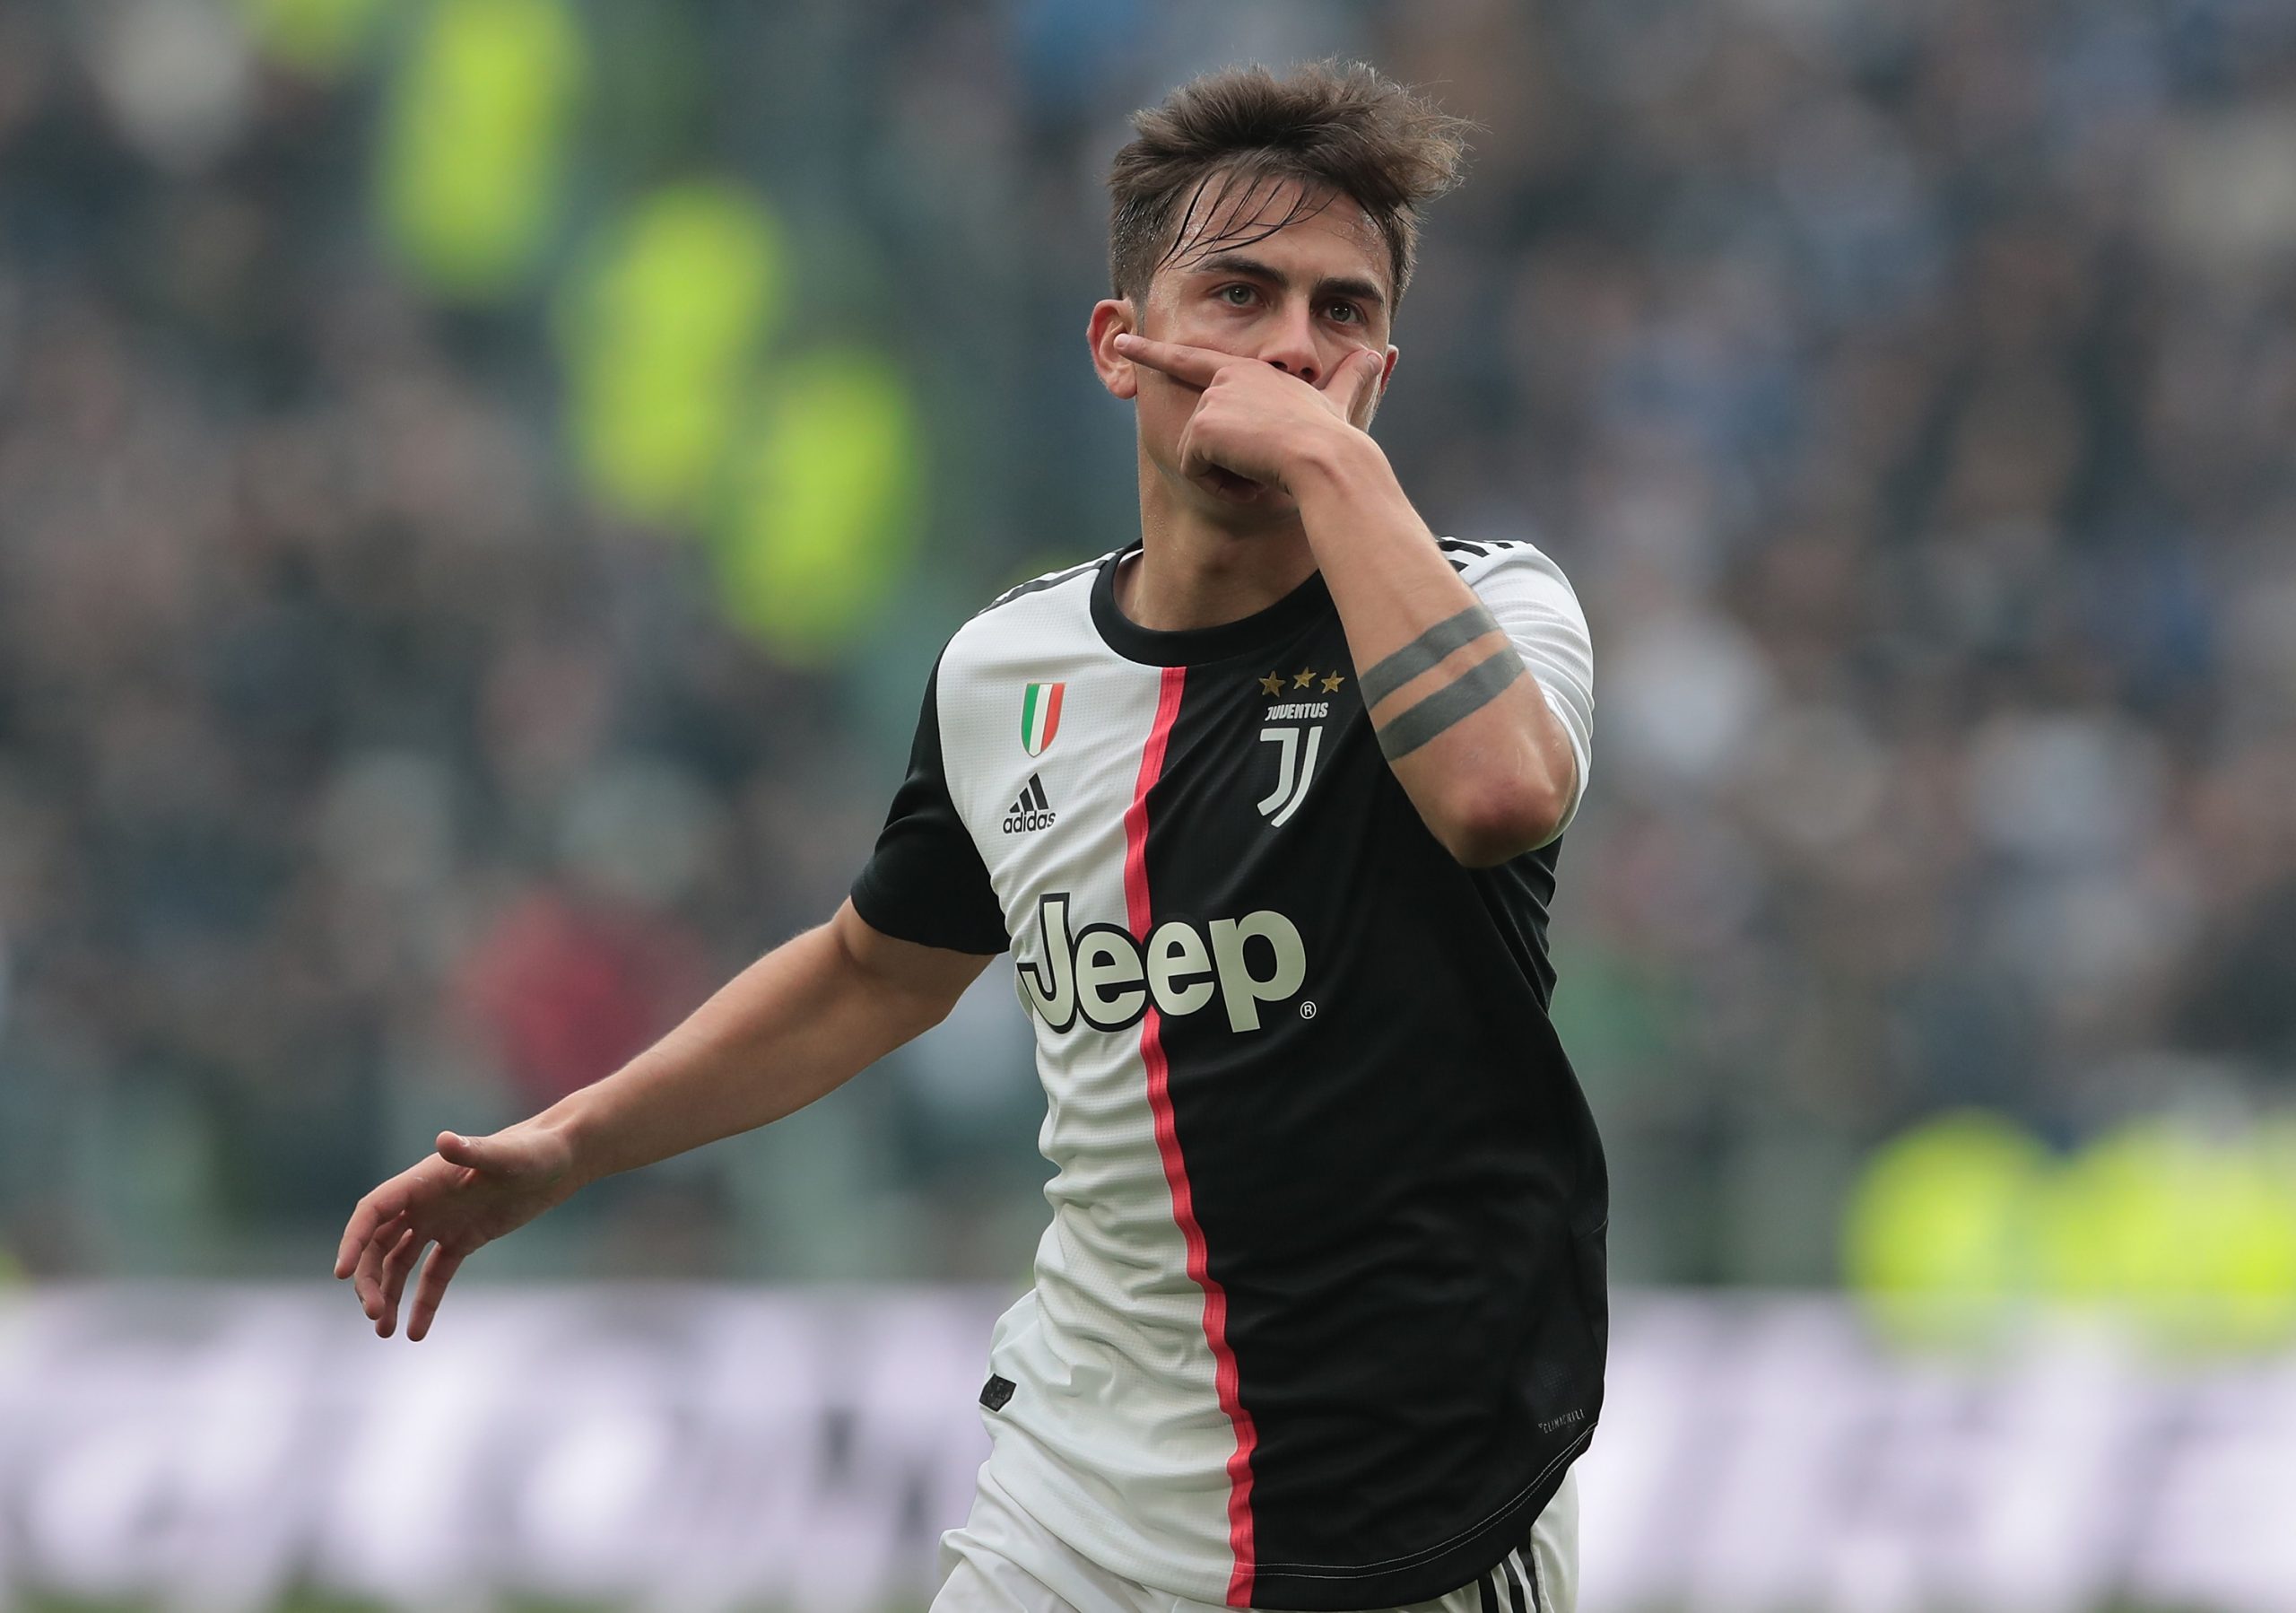 Paulo Dybala has been a target for Manchester United in the past. (GETTY Images)